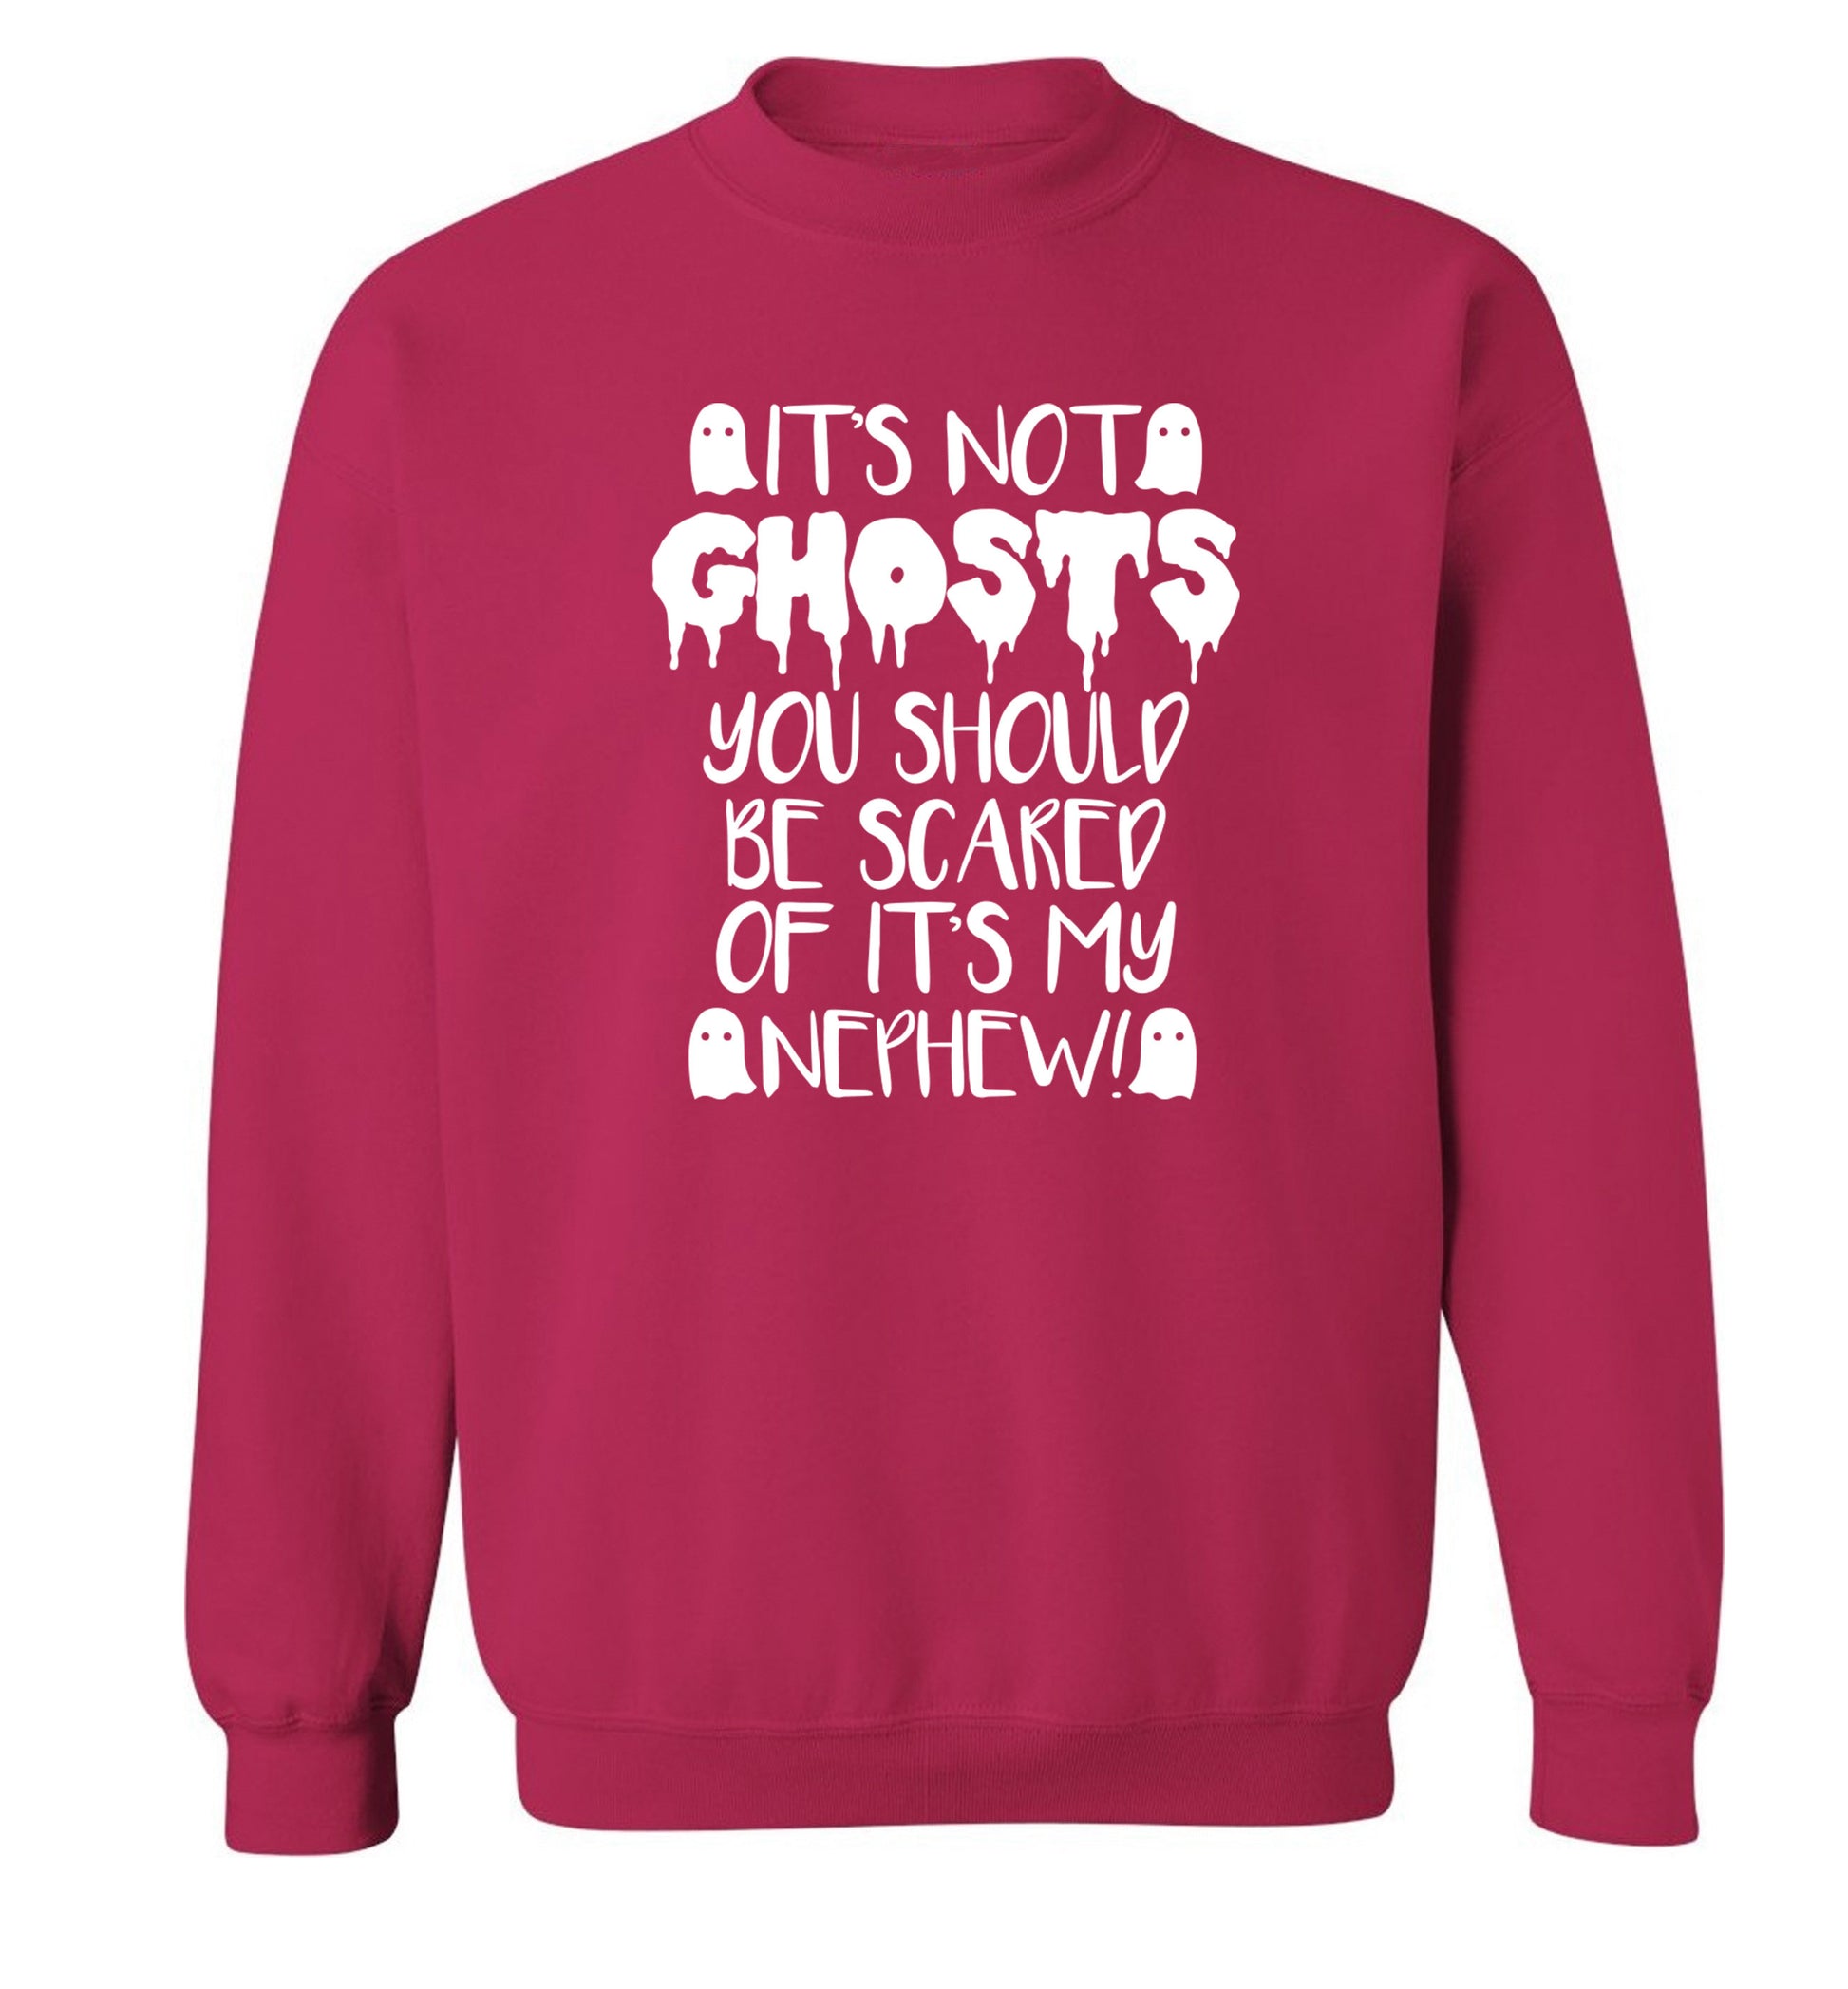 It's not ghosts you should be scared of it's my nephew! Adult's unisex pink Sweater 2XL